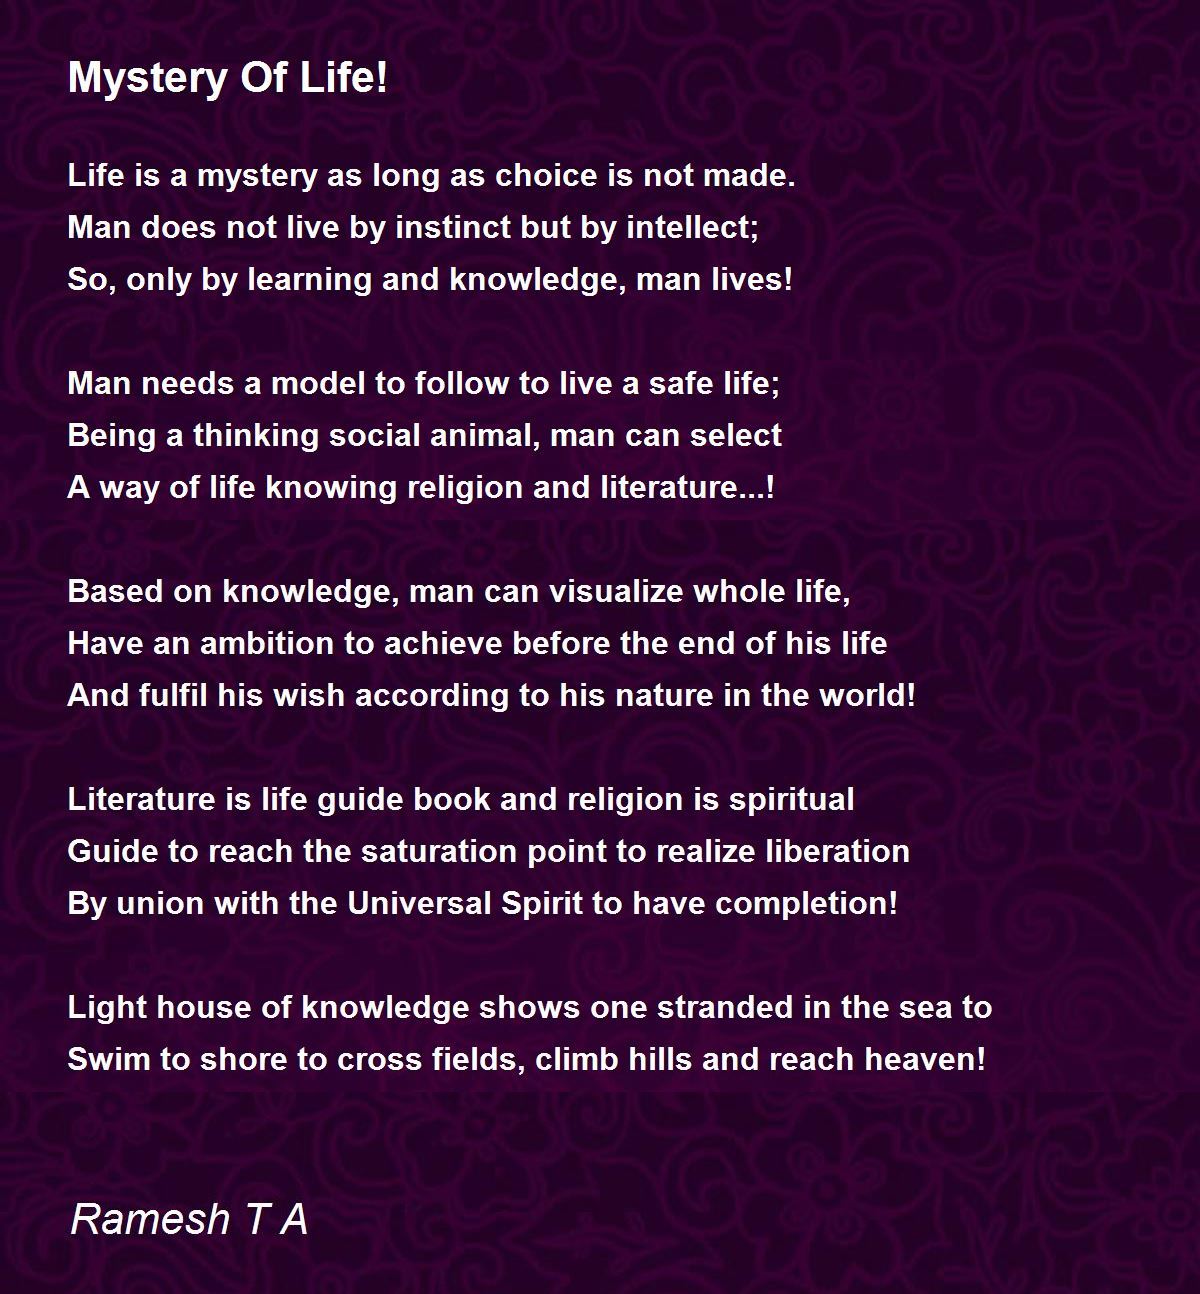 Mystery Of Life! - Mystery Of Life! Poem by Ramesh T A